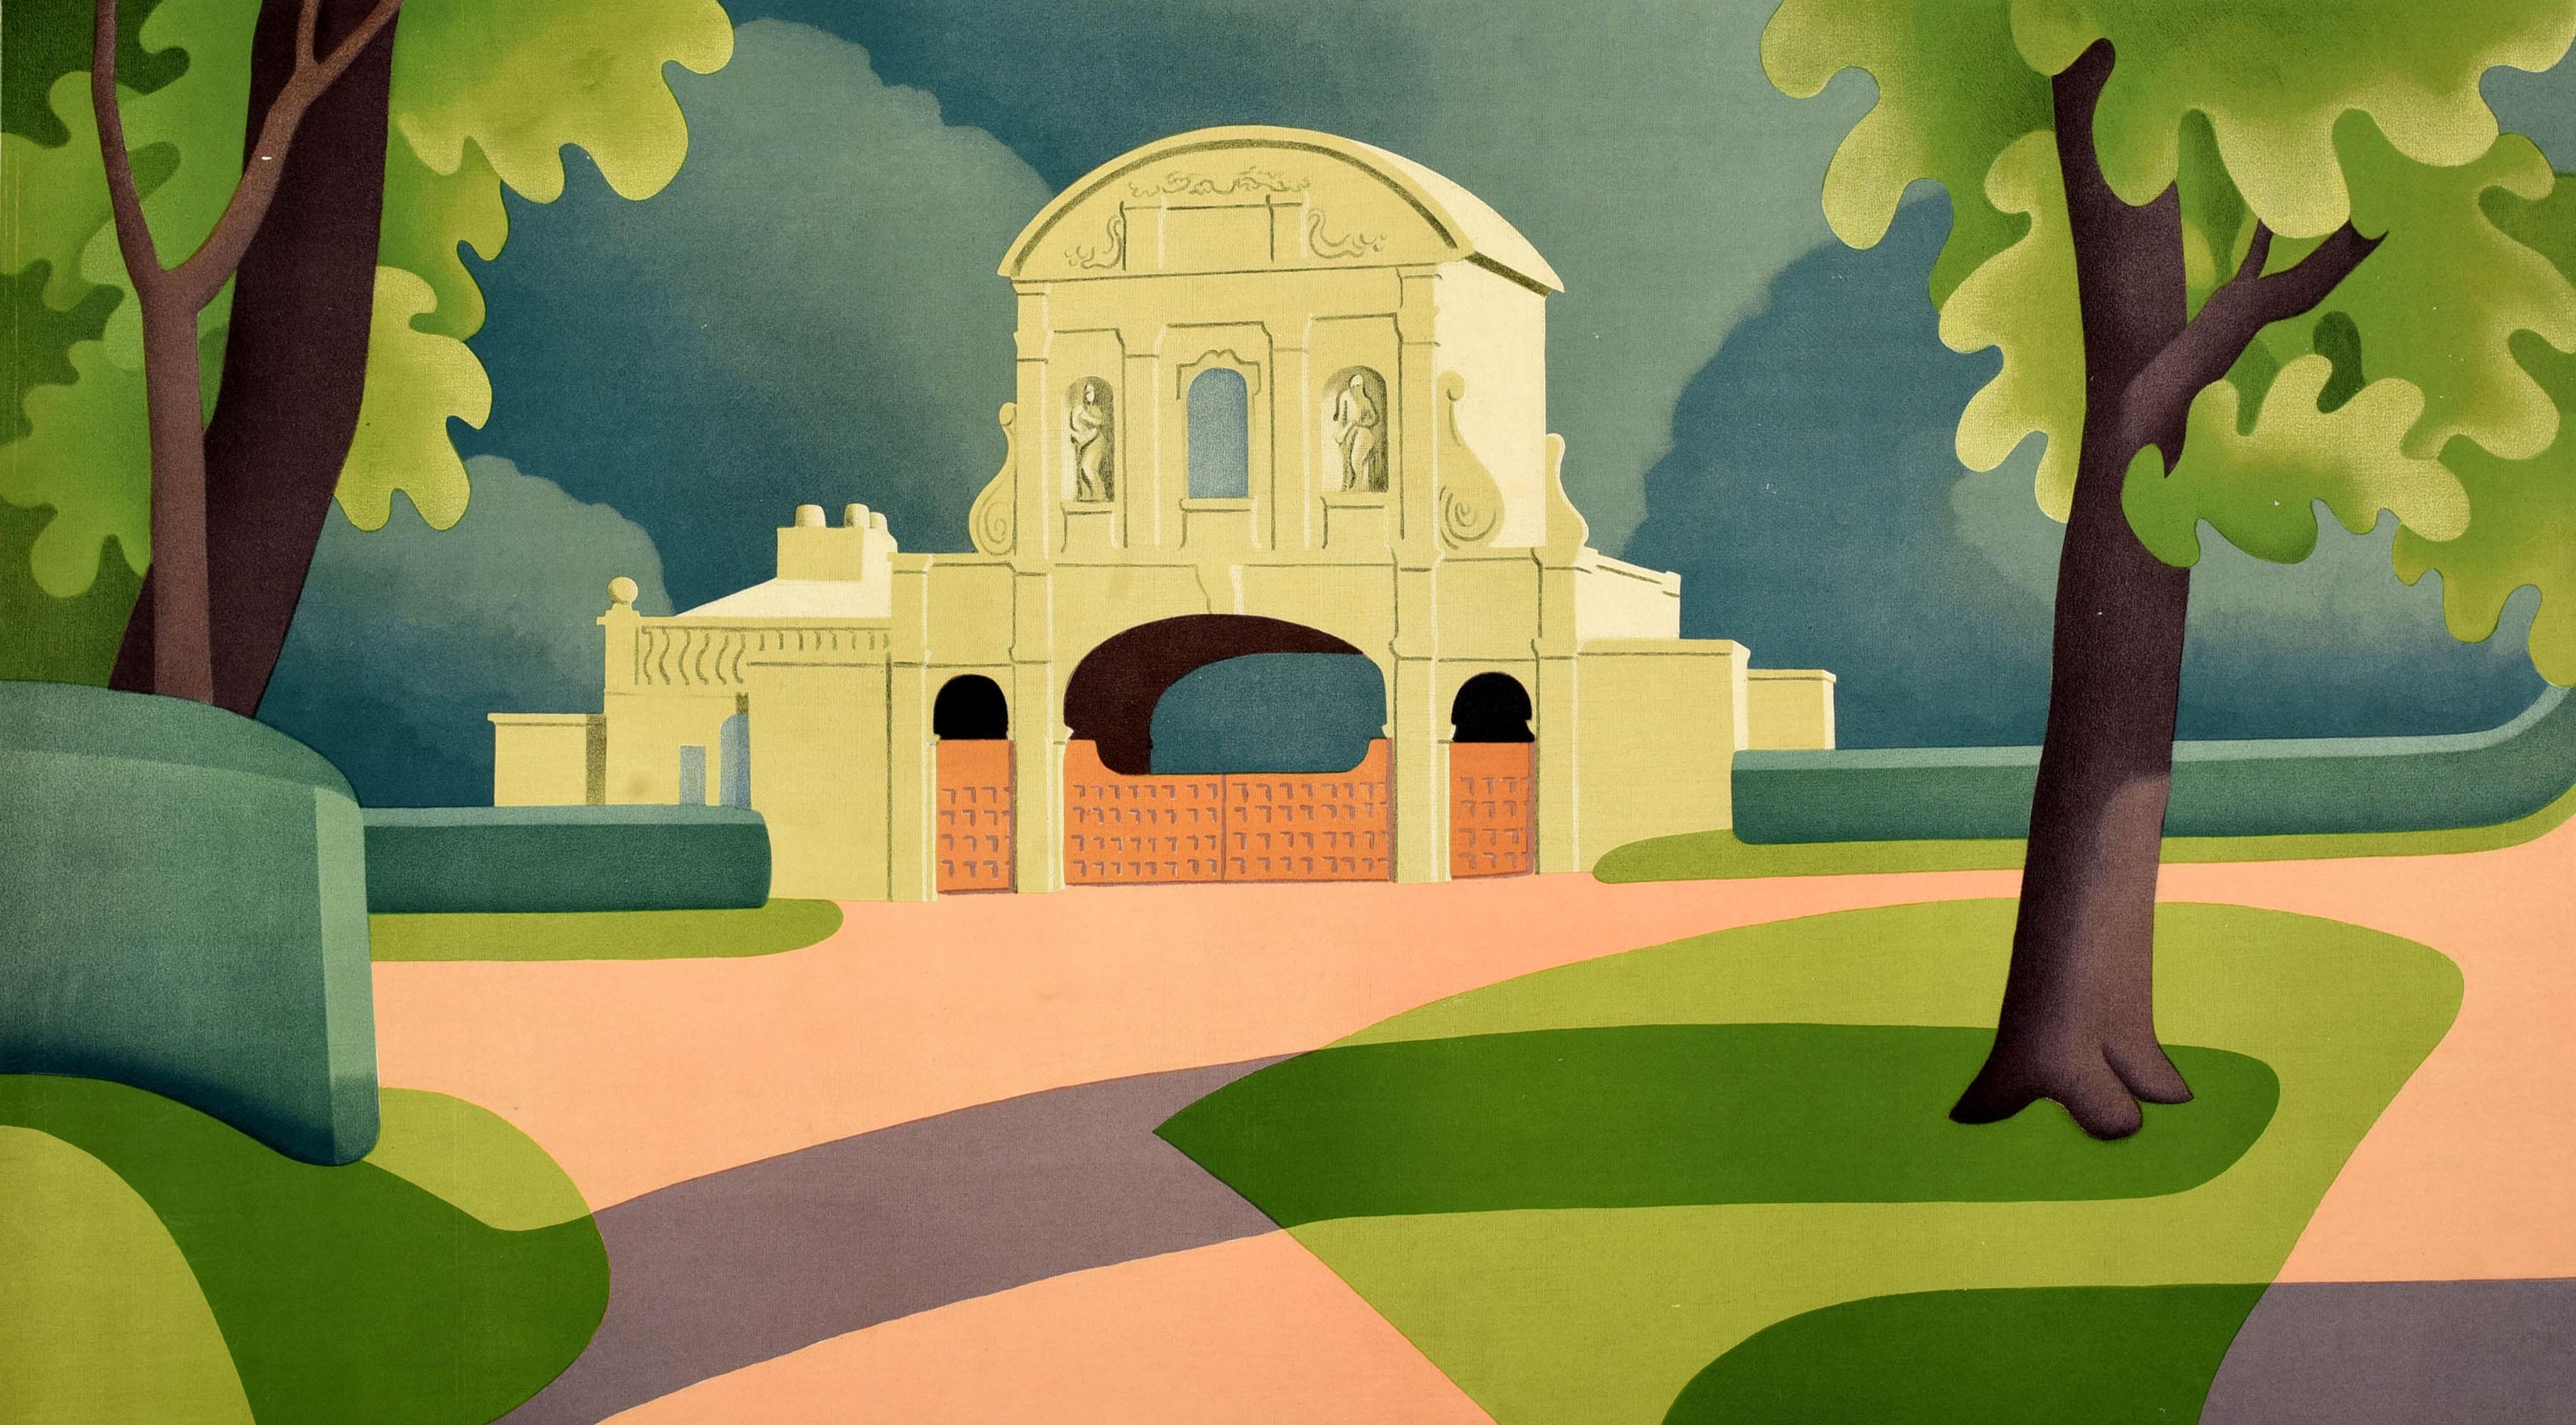 Original vintage travel advertising poster issued by Shell - To Visit Britain's Landmarks You Can Be Sure Of Shell - featuring a view of the historic Temple Bar gate by the English painter Edward Scroggie (1906–1944) surrounded by green trees and